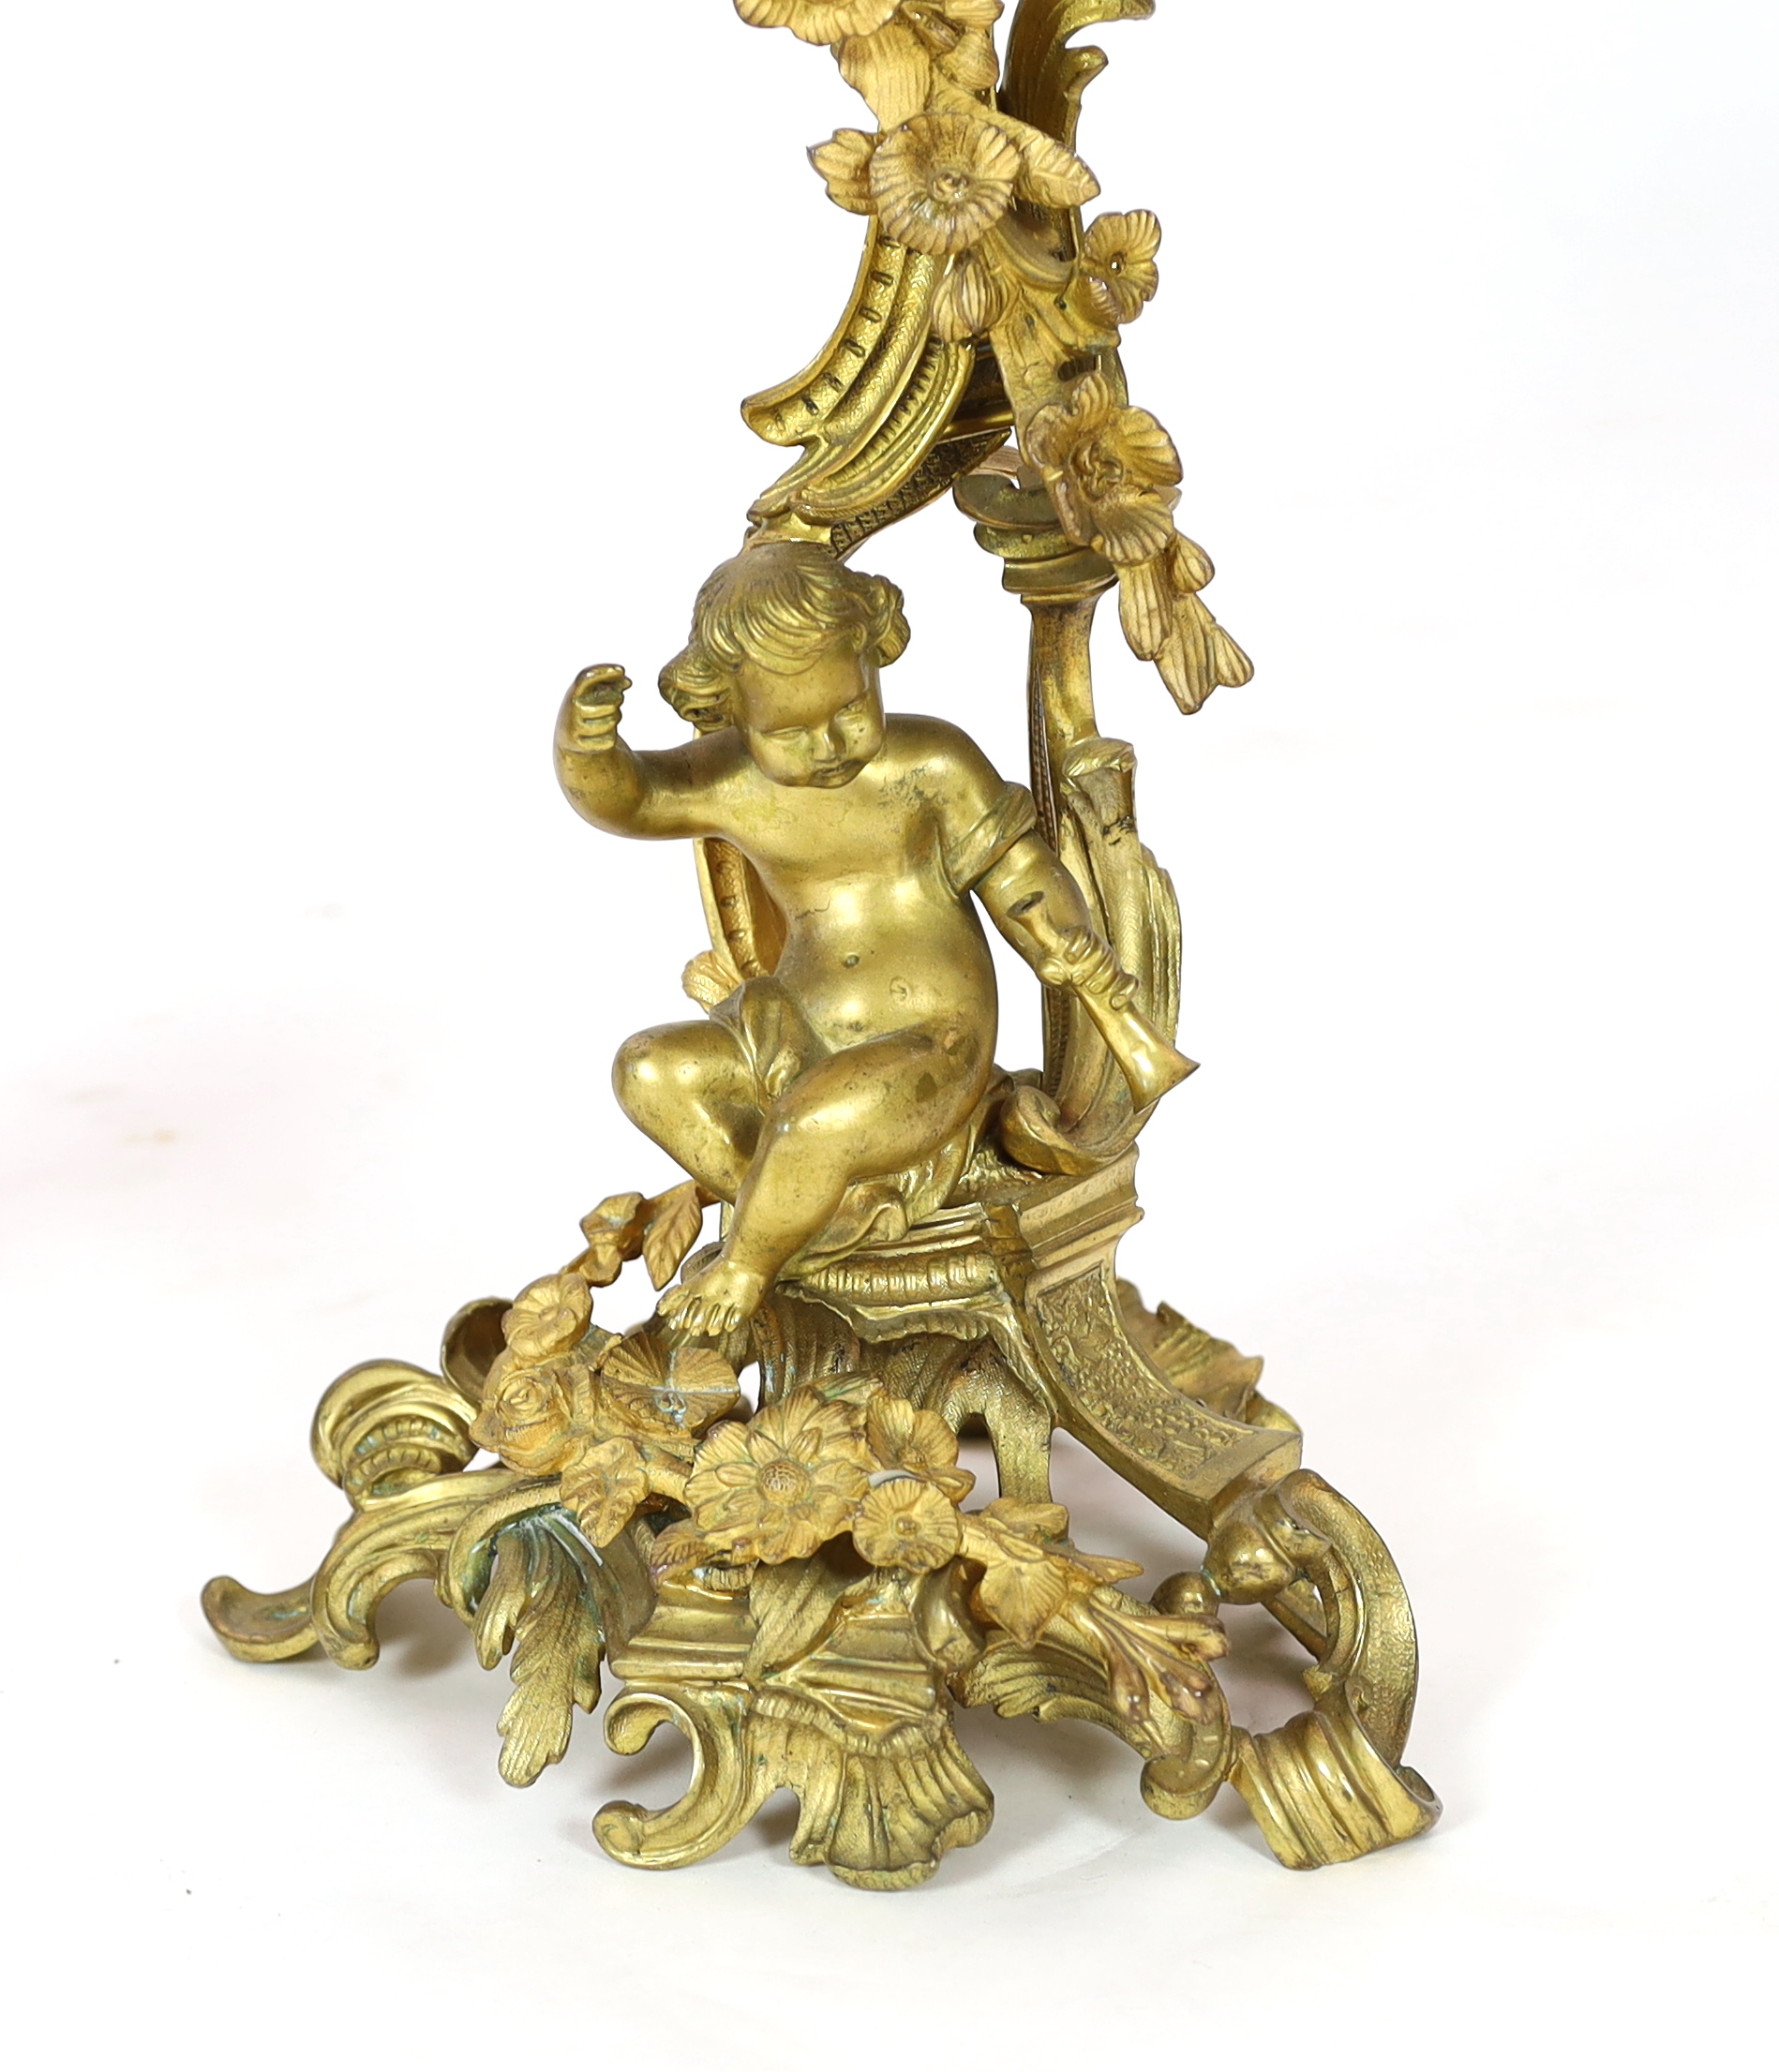 A pair of late 19th century French Louis XVI style ormolu seven light candelabra, 74cm high